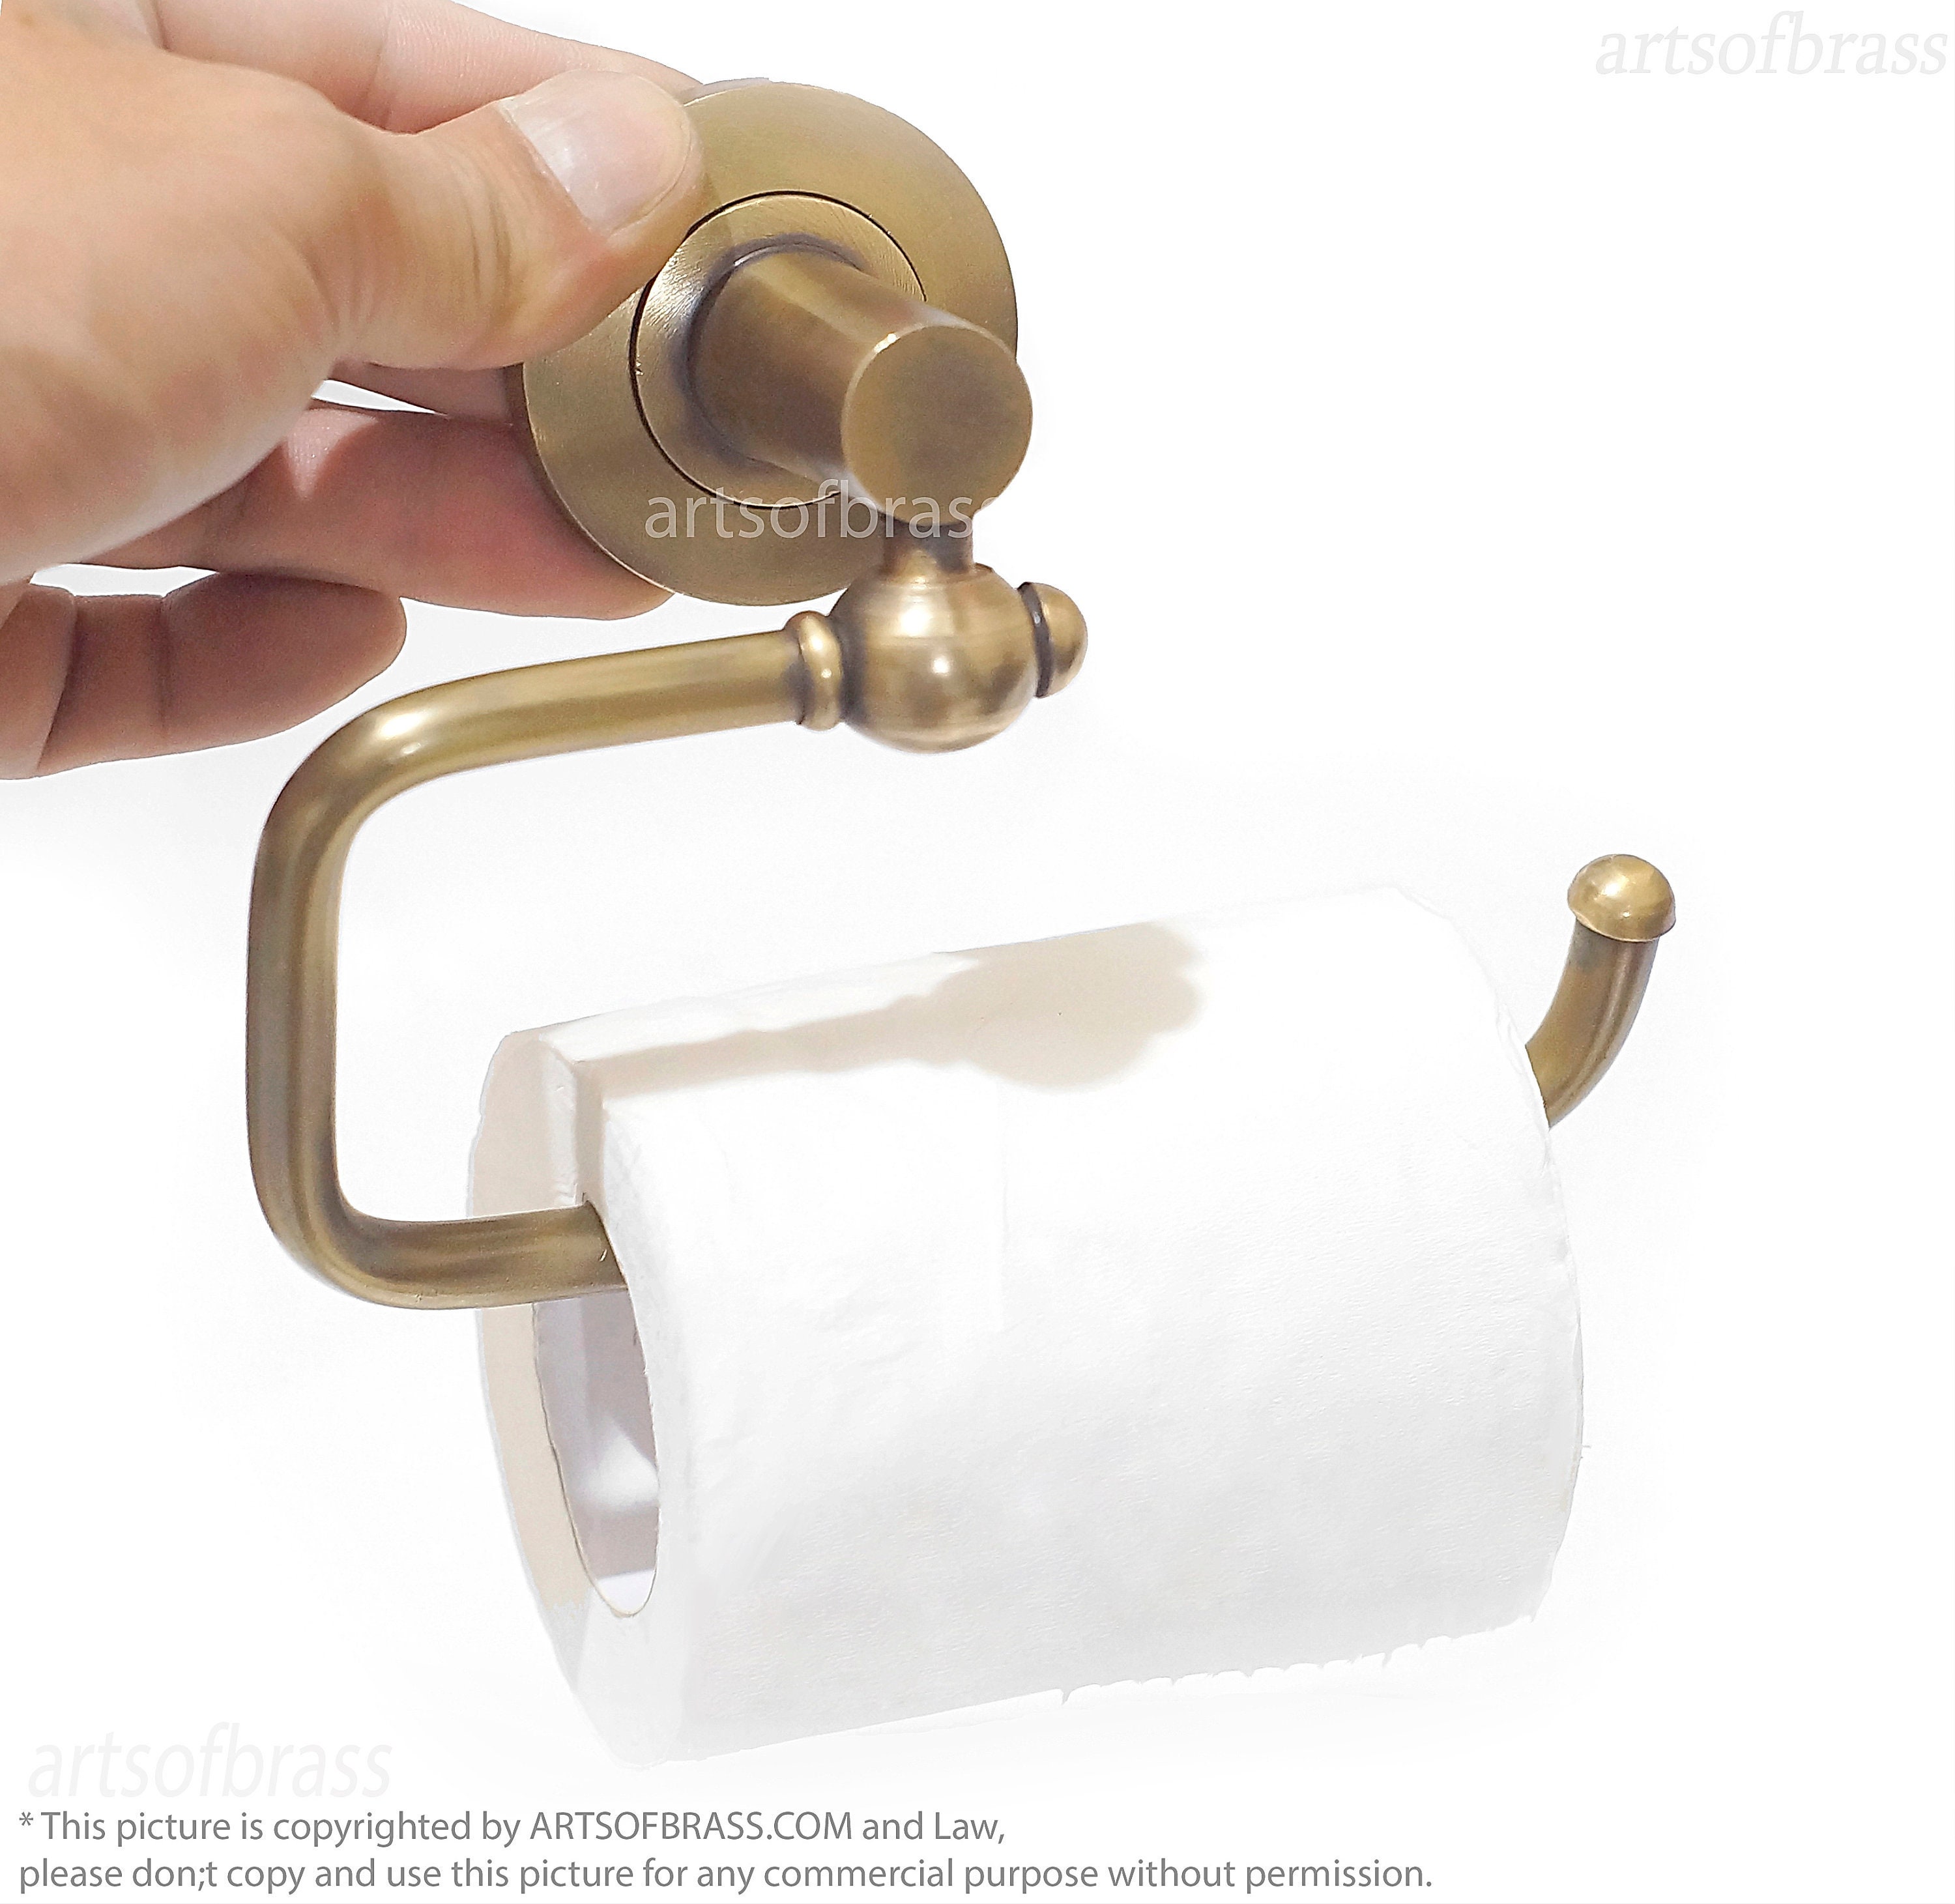 11.5 x 8.5 x... Bisk 00403 Deco Toilet Roll Holder with Cover in Antique Brass 